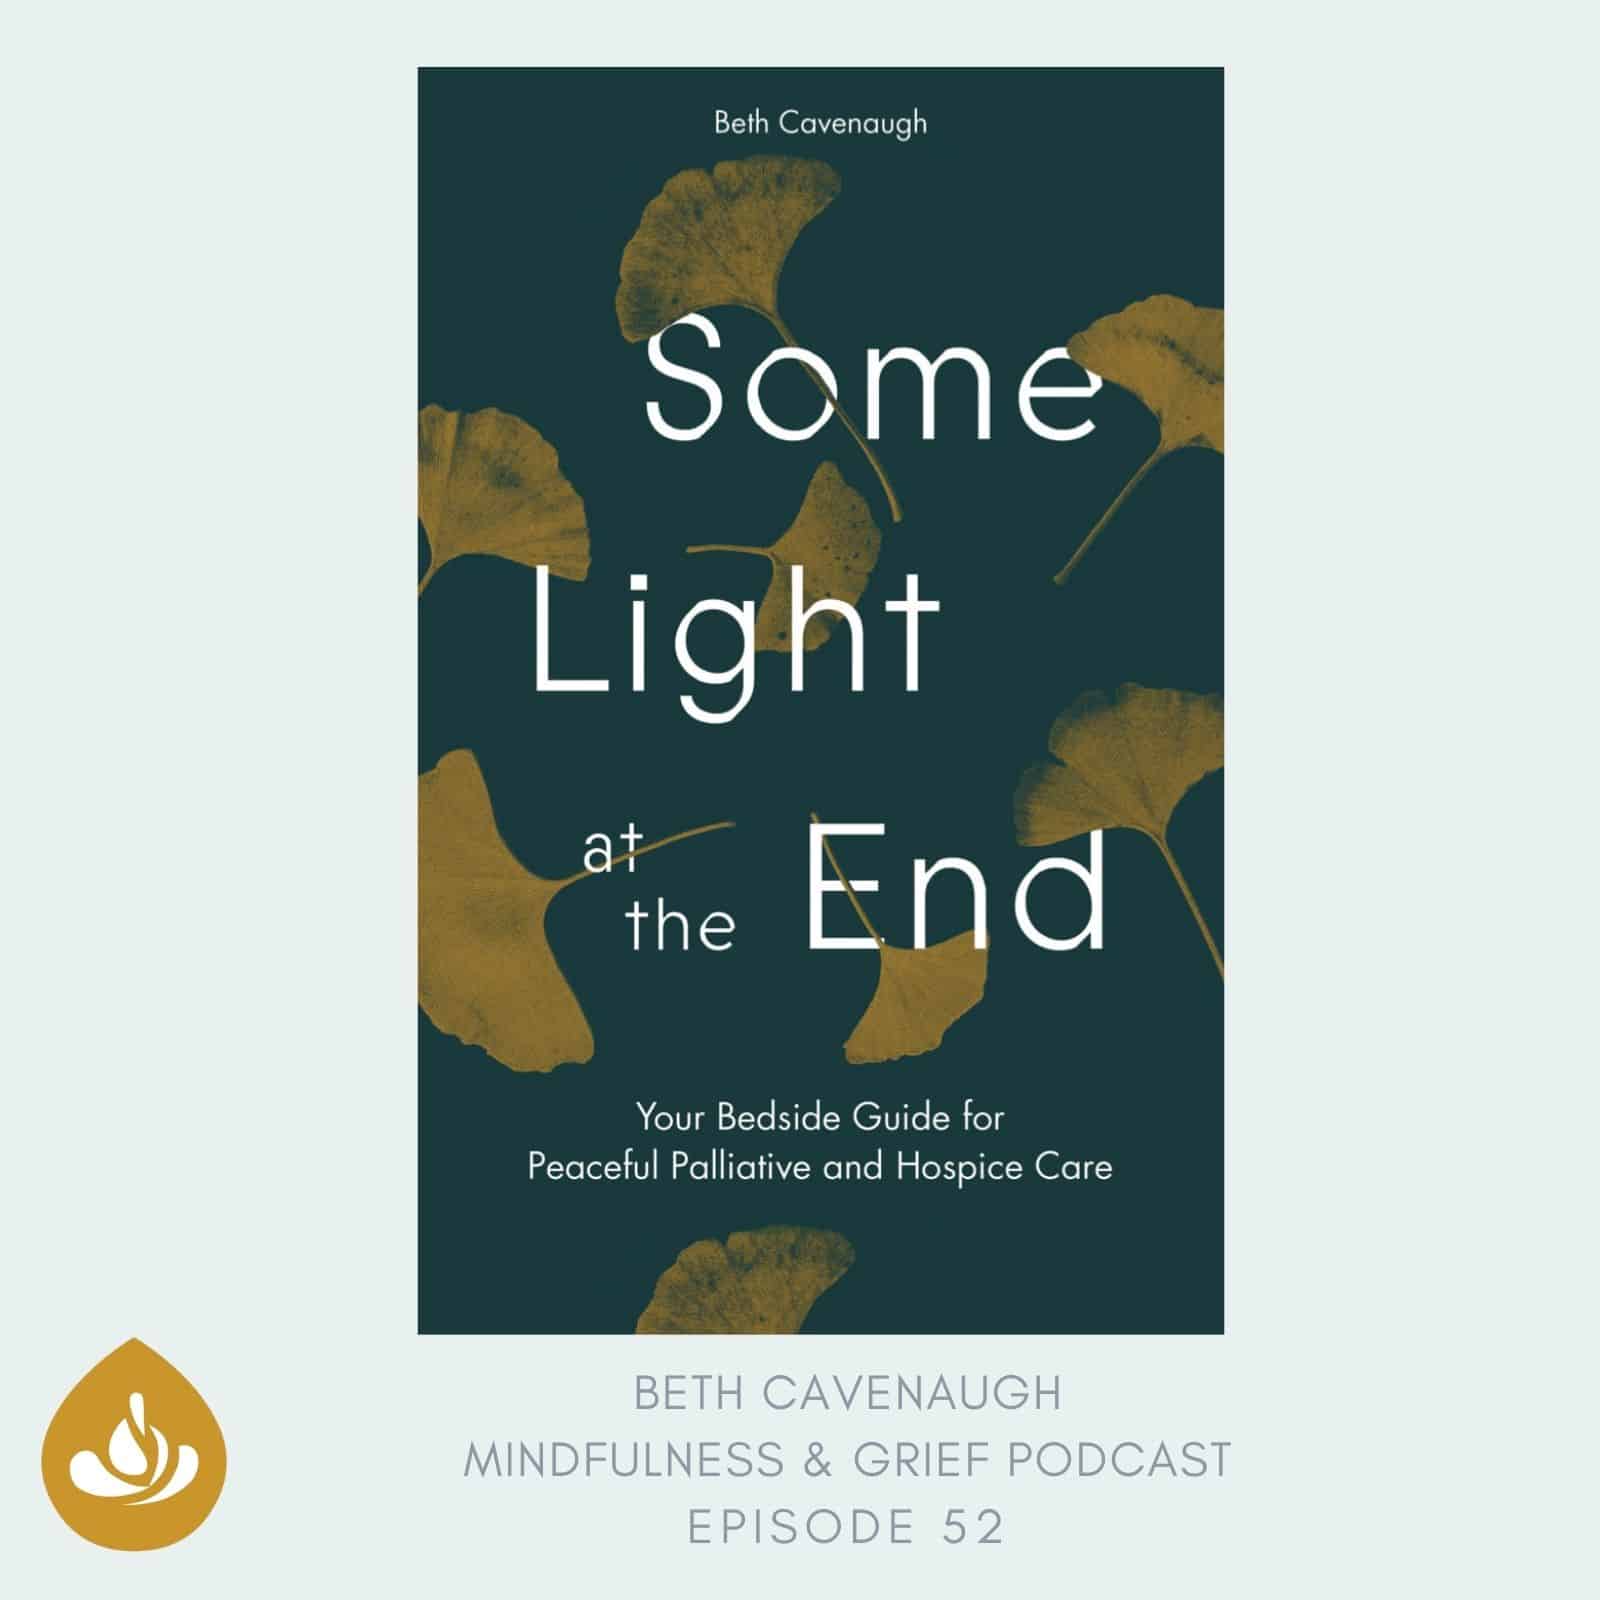 Some Light at the End: Your Bedside Guide for Peaceful Palliative & Hospice Care with Hospice Nurse Beth Cavenaugh